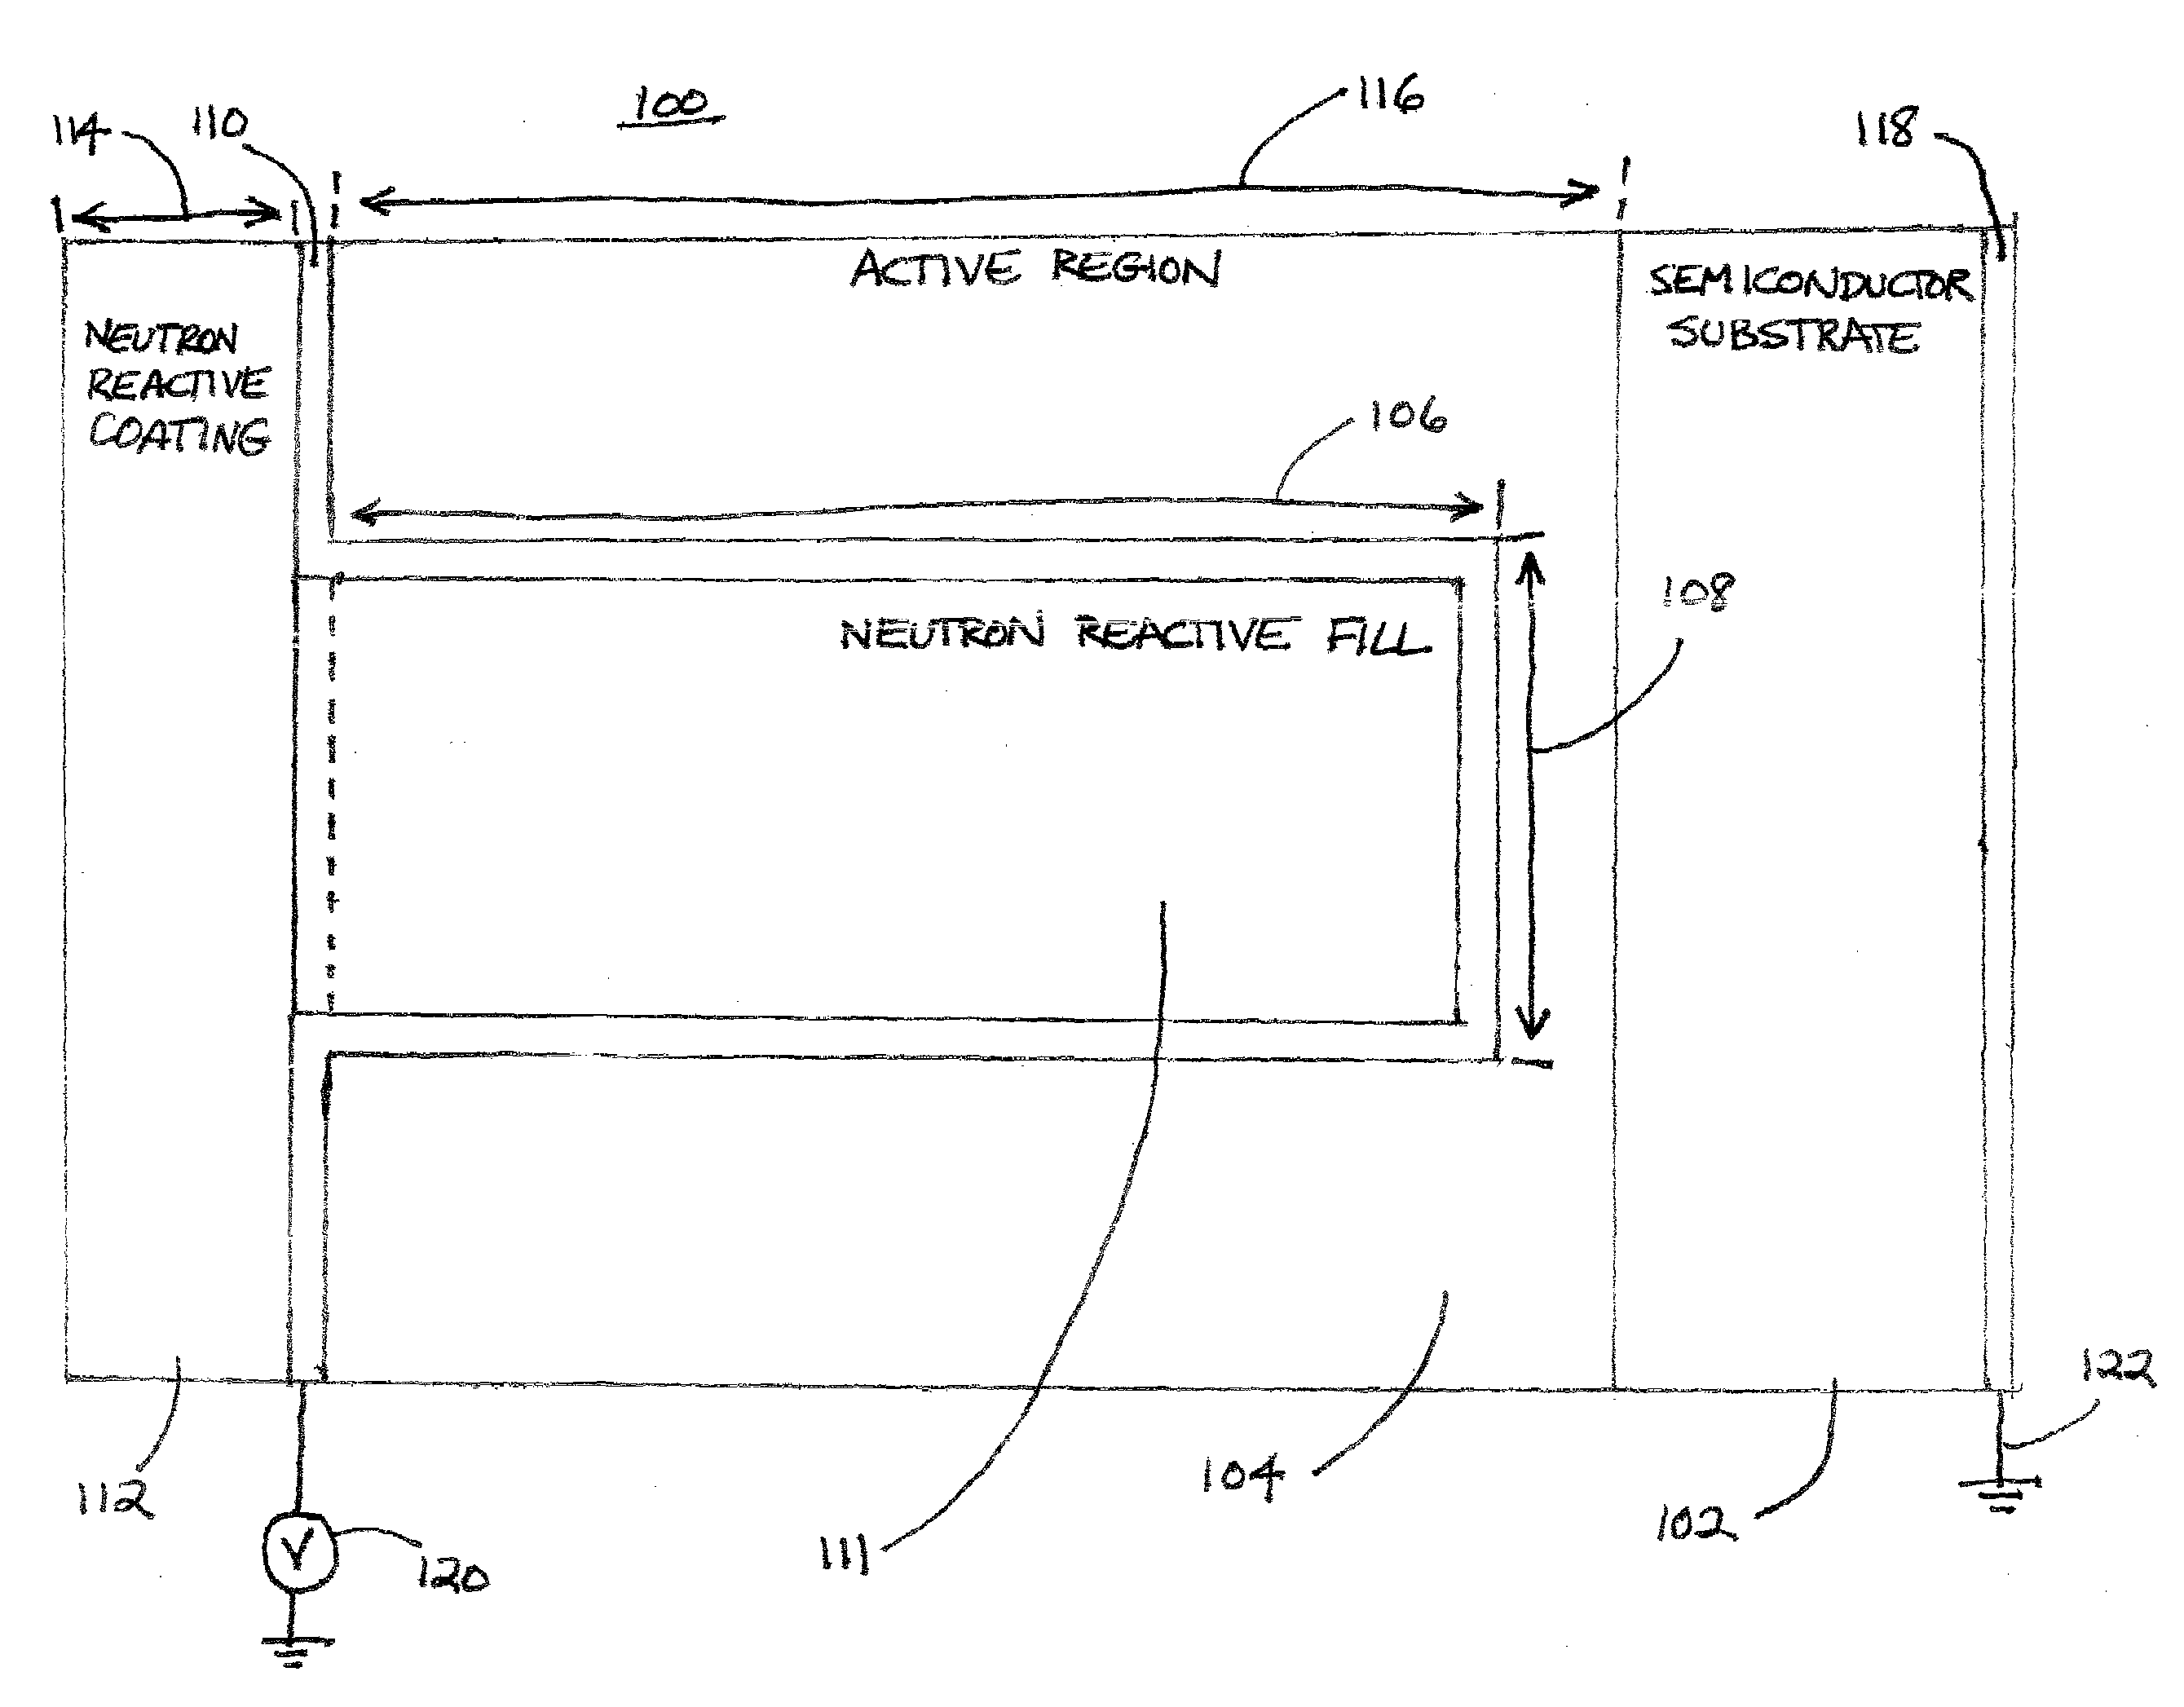 Radiation detection system using solid-state detector devices